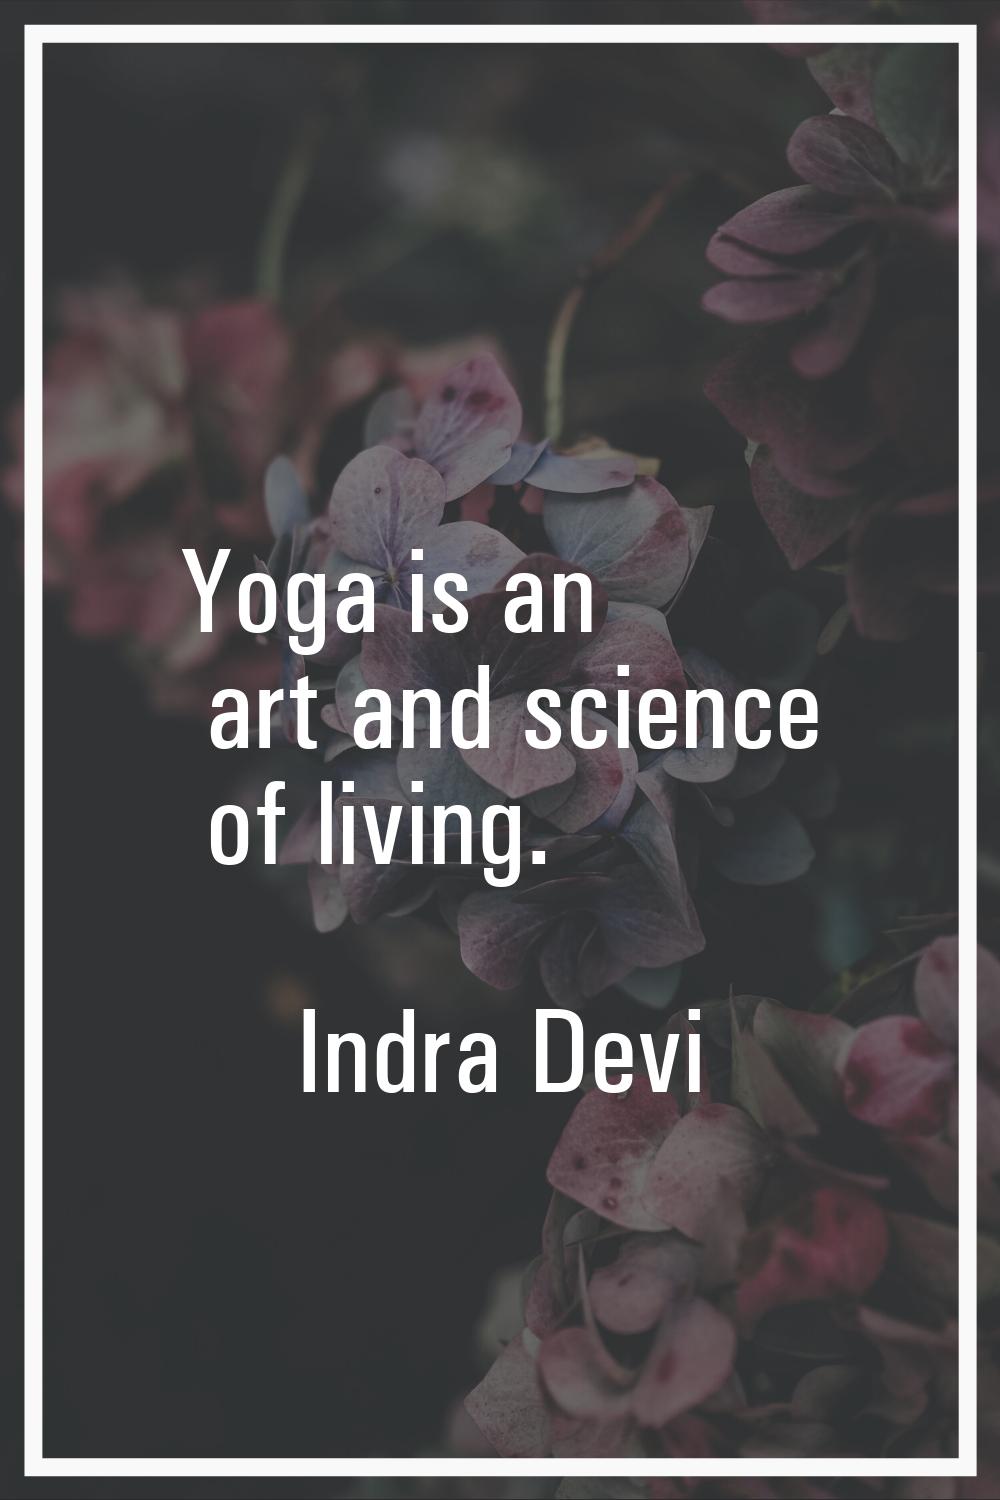 Yoga is an art and science of living.